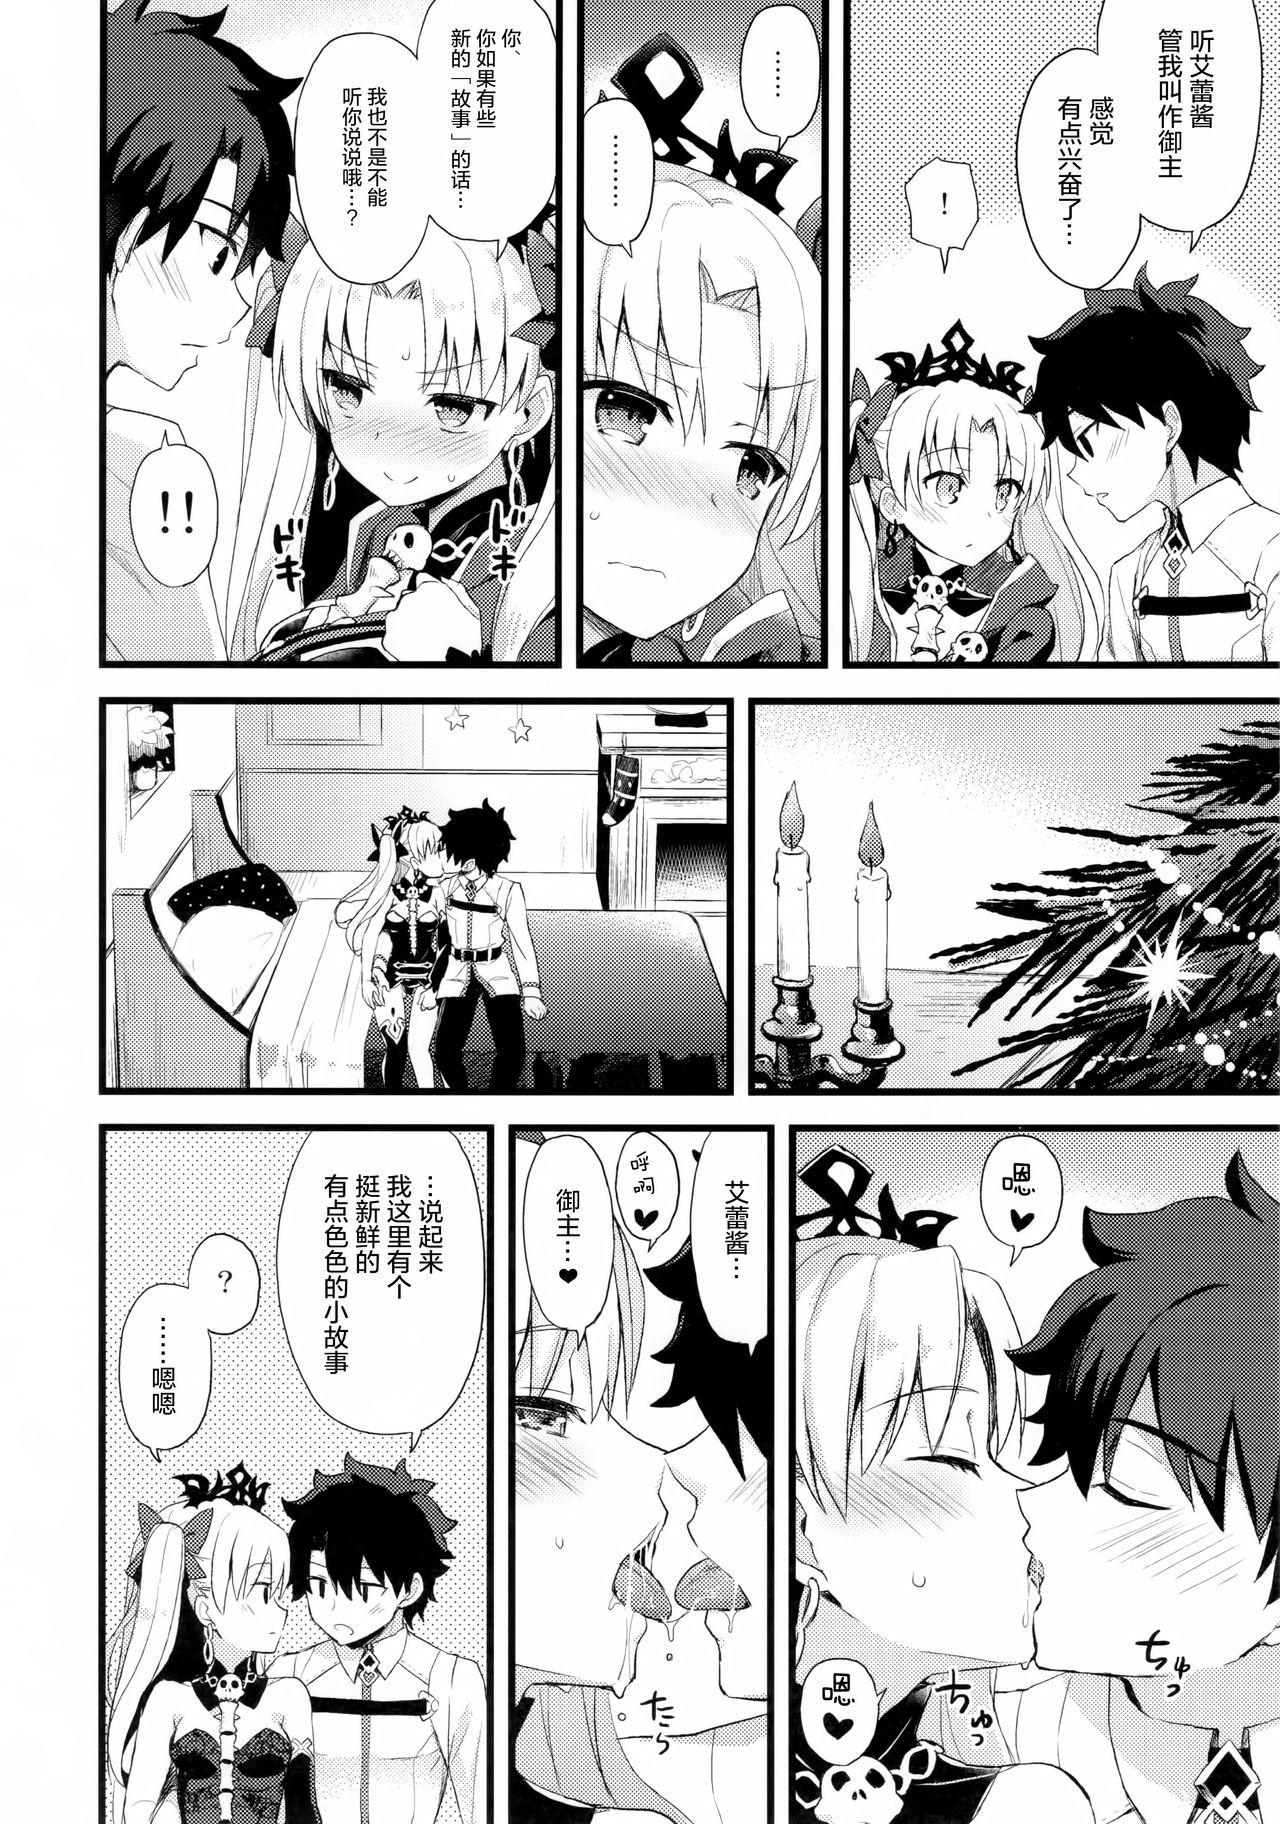 Couple Sex My Room de Ere-chan to. - Fate grand order Amatuer - Page 8